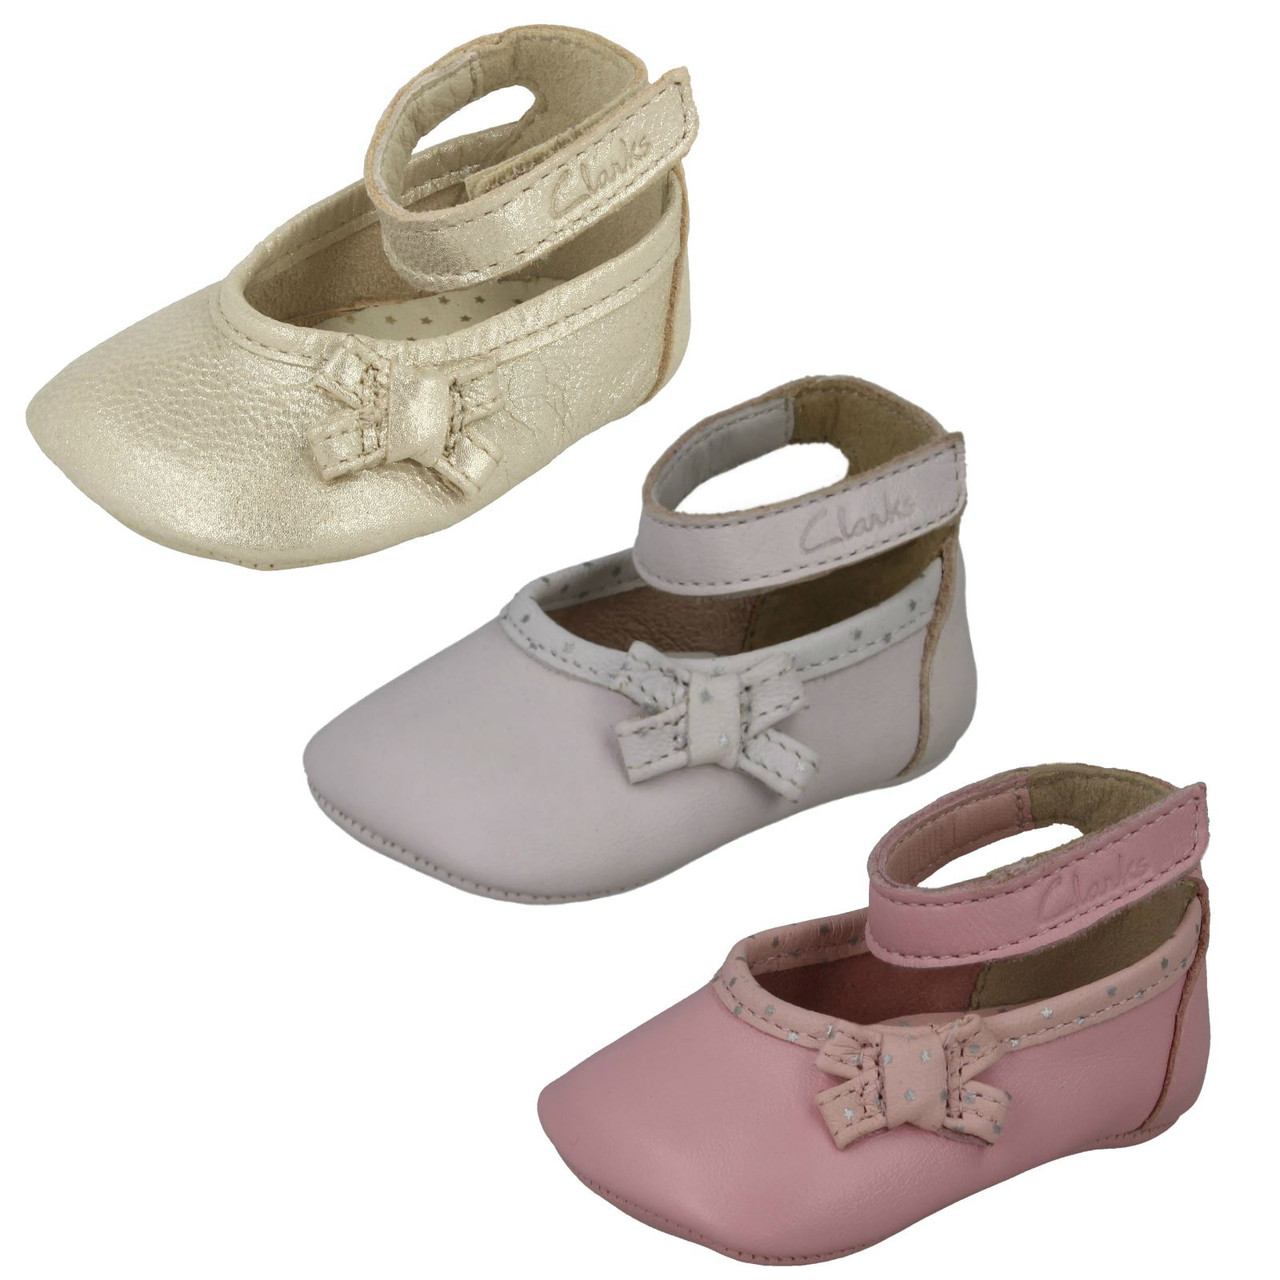 Girls Clarks First Shoes